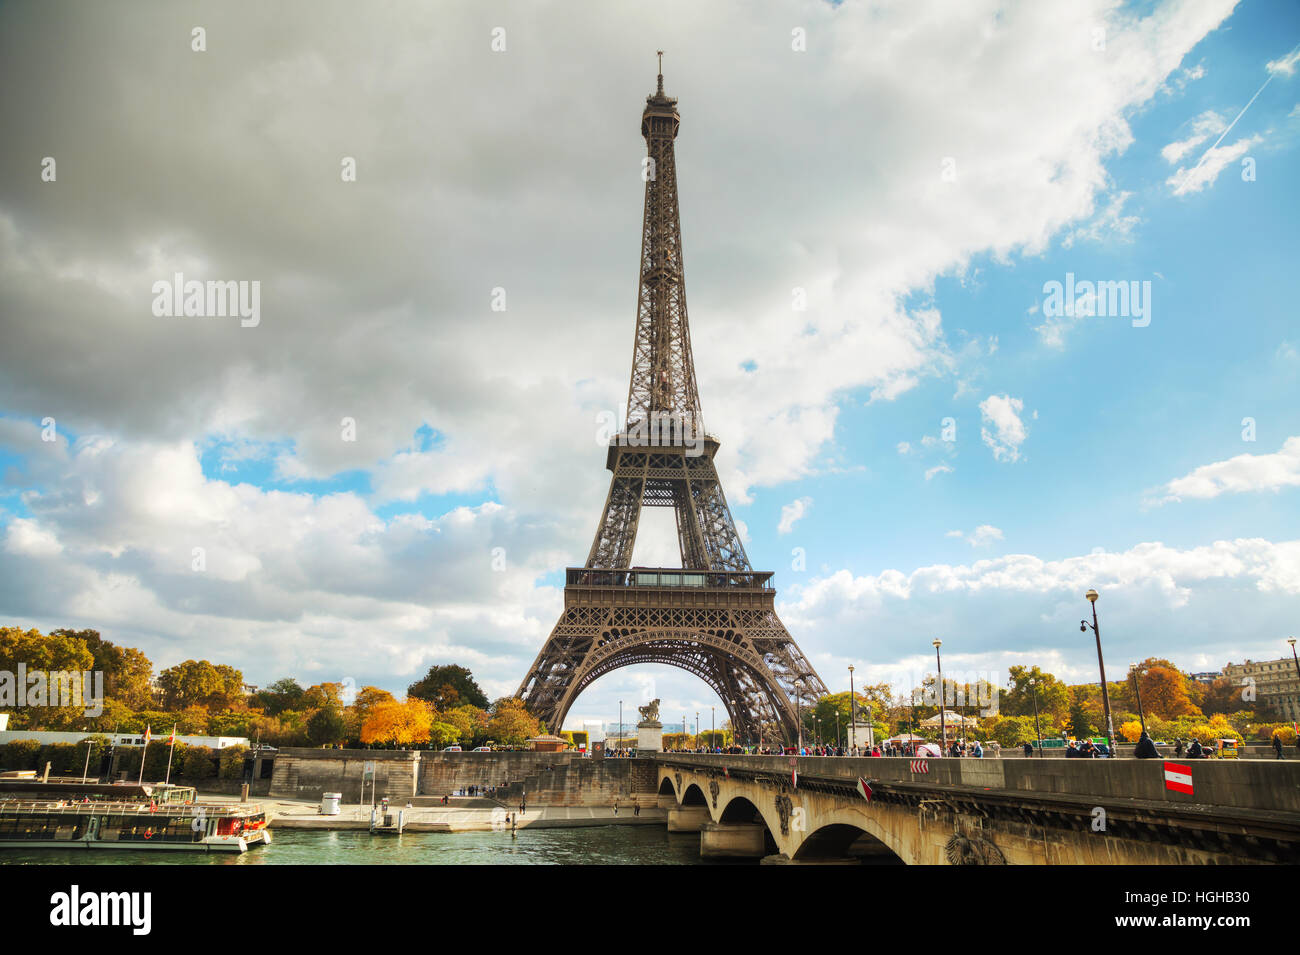 PARIS - NOVEMBER 2: Eiffel tower surrounded by tourists on November 2, 2016 in Paris, France. Stock Photo